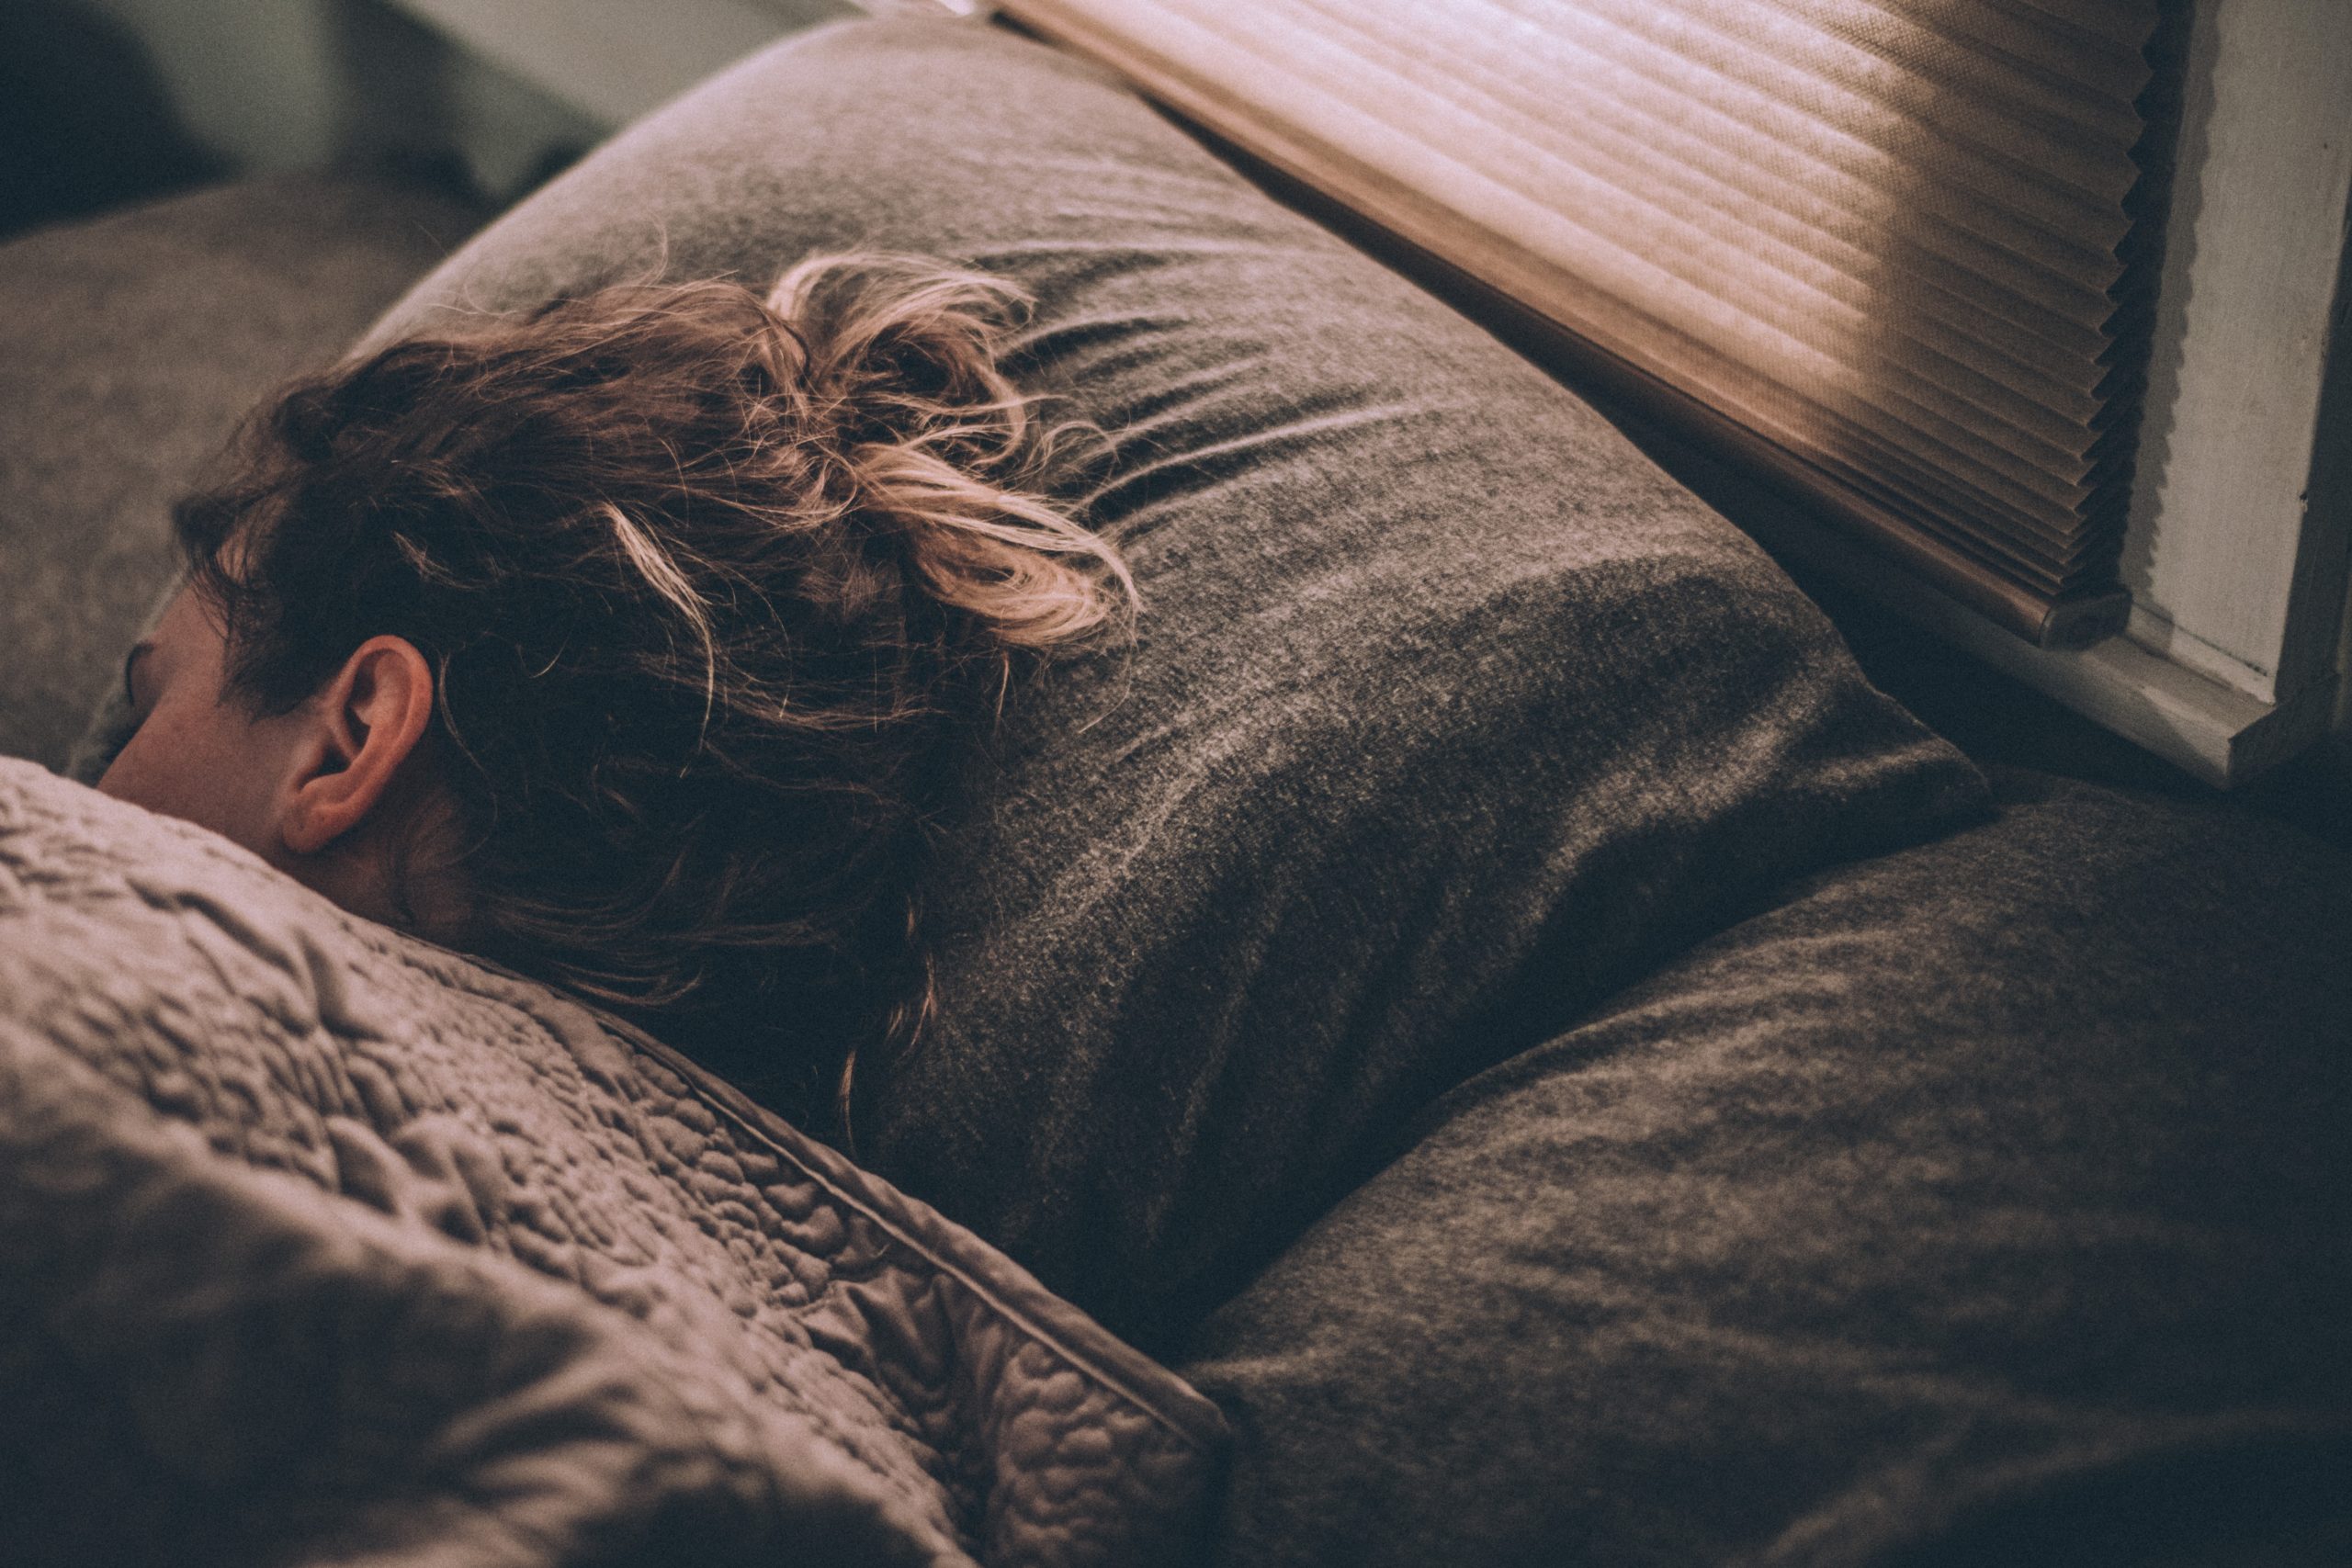 3 Ways to Get Better Sleep & Why it’s Important for People in Recovery, According to Science